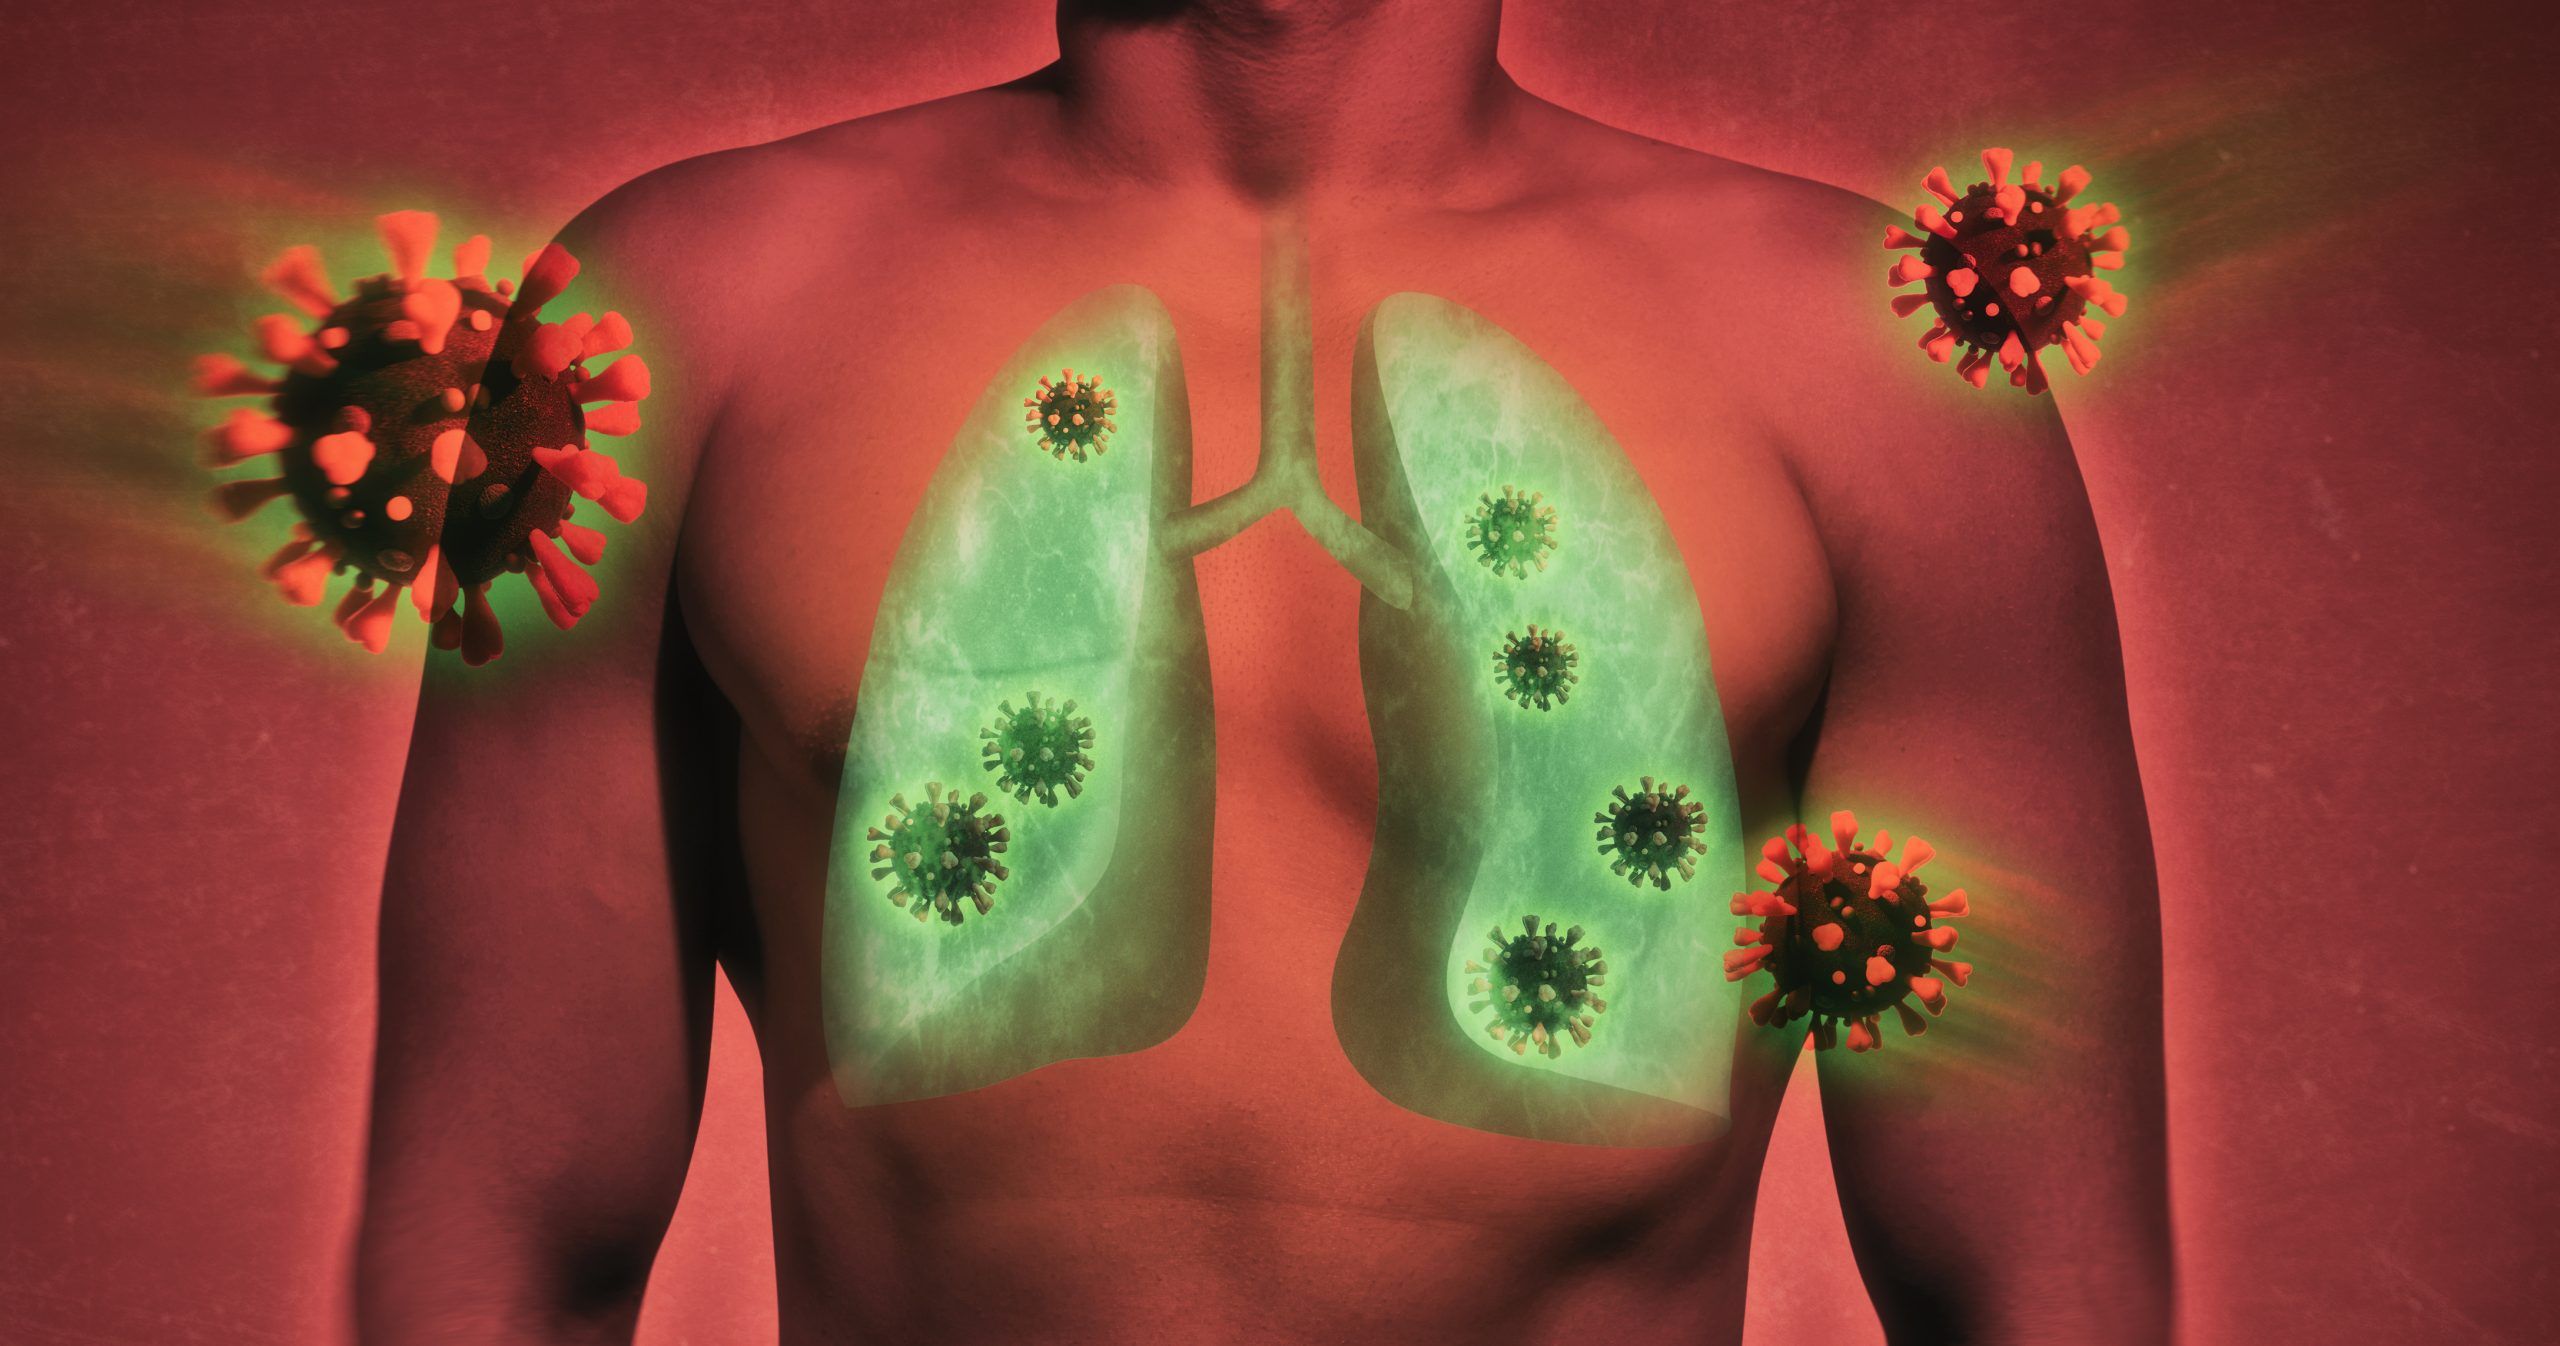 For a virus that was originally thought to target the lungs, it turns out it ravages almost every part of the. body. Stock/Getty